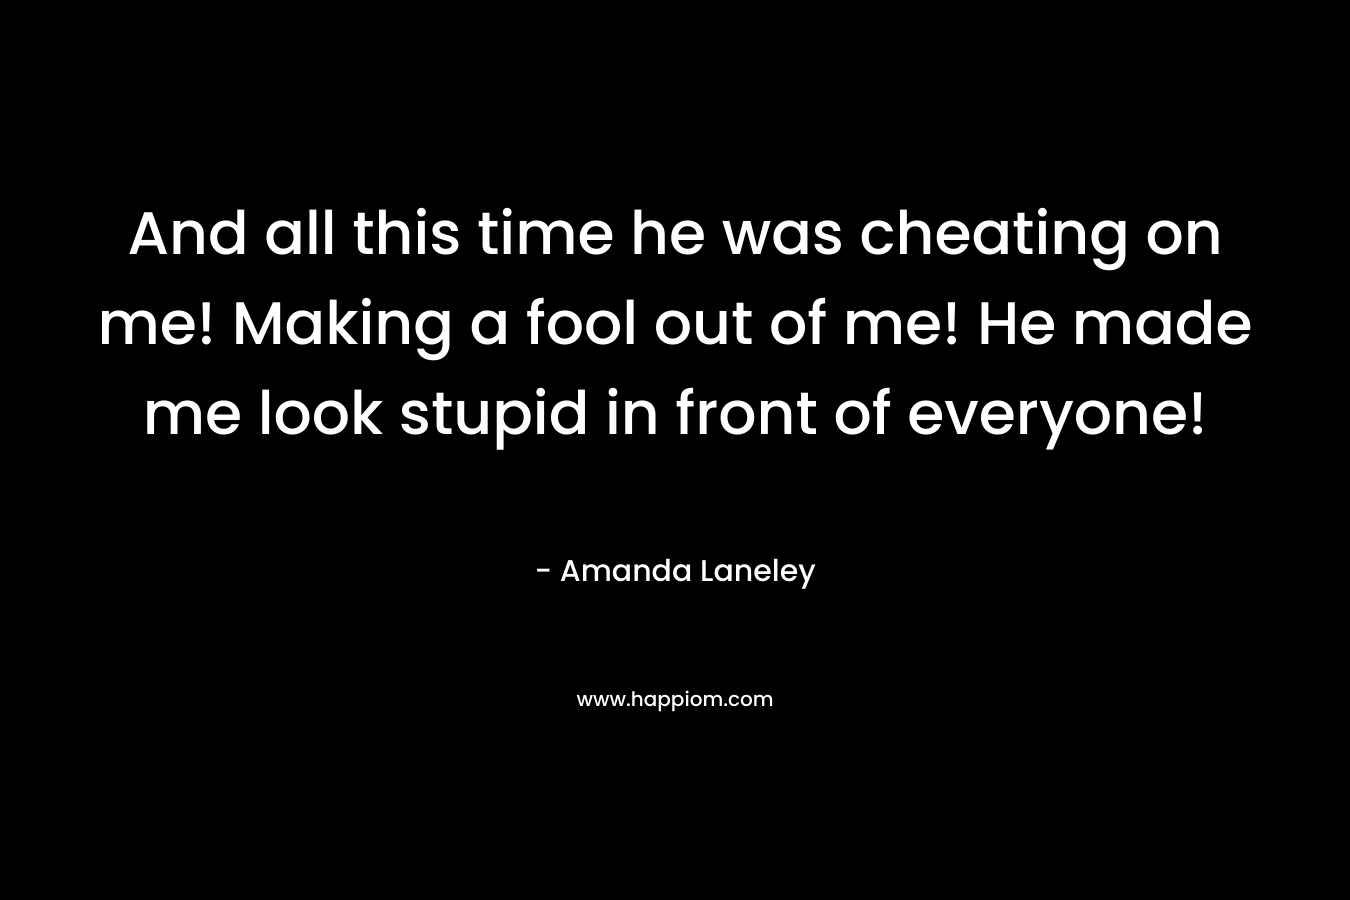 And all this time he was cheating on me! Making a fool out of me! He made me look stupid in front of everyone! – Amanda Laneley